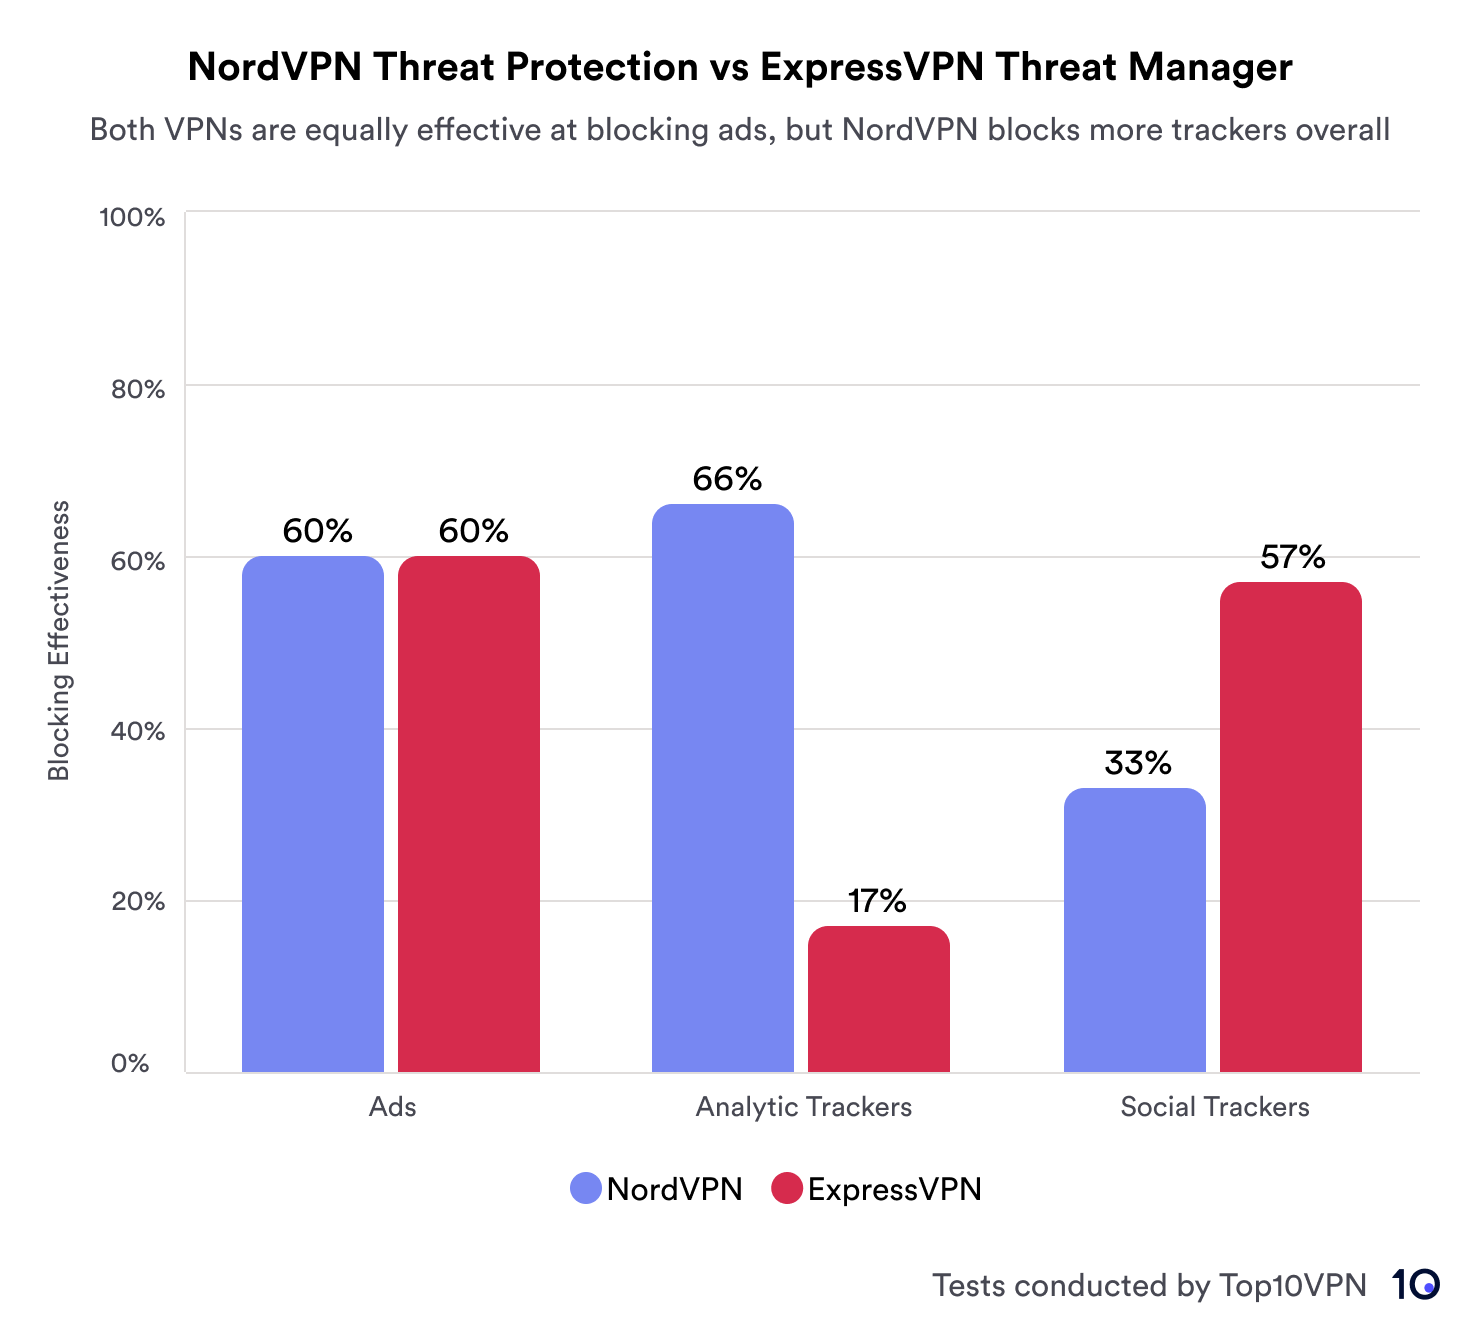 A bar graph comparing the effectiveness of NordVPN Threat Protection versus ExpressVPN Threat Manager in blocking ads, analytic trackers, and social trackers. Both NordVPN and ExpressVPN are equally effective at blocking ads with a 60% effectiveness rate. NordVPN outperforms ExpressVPN in blocking analytic trackers at 66% compared to 17% and social trackers at 57% to ExpressVPN's 33%.